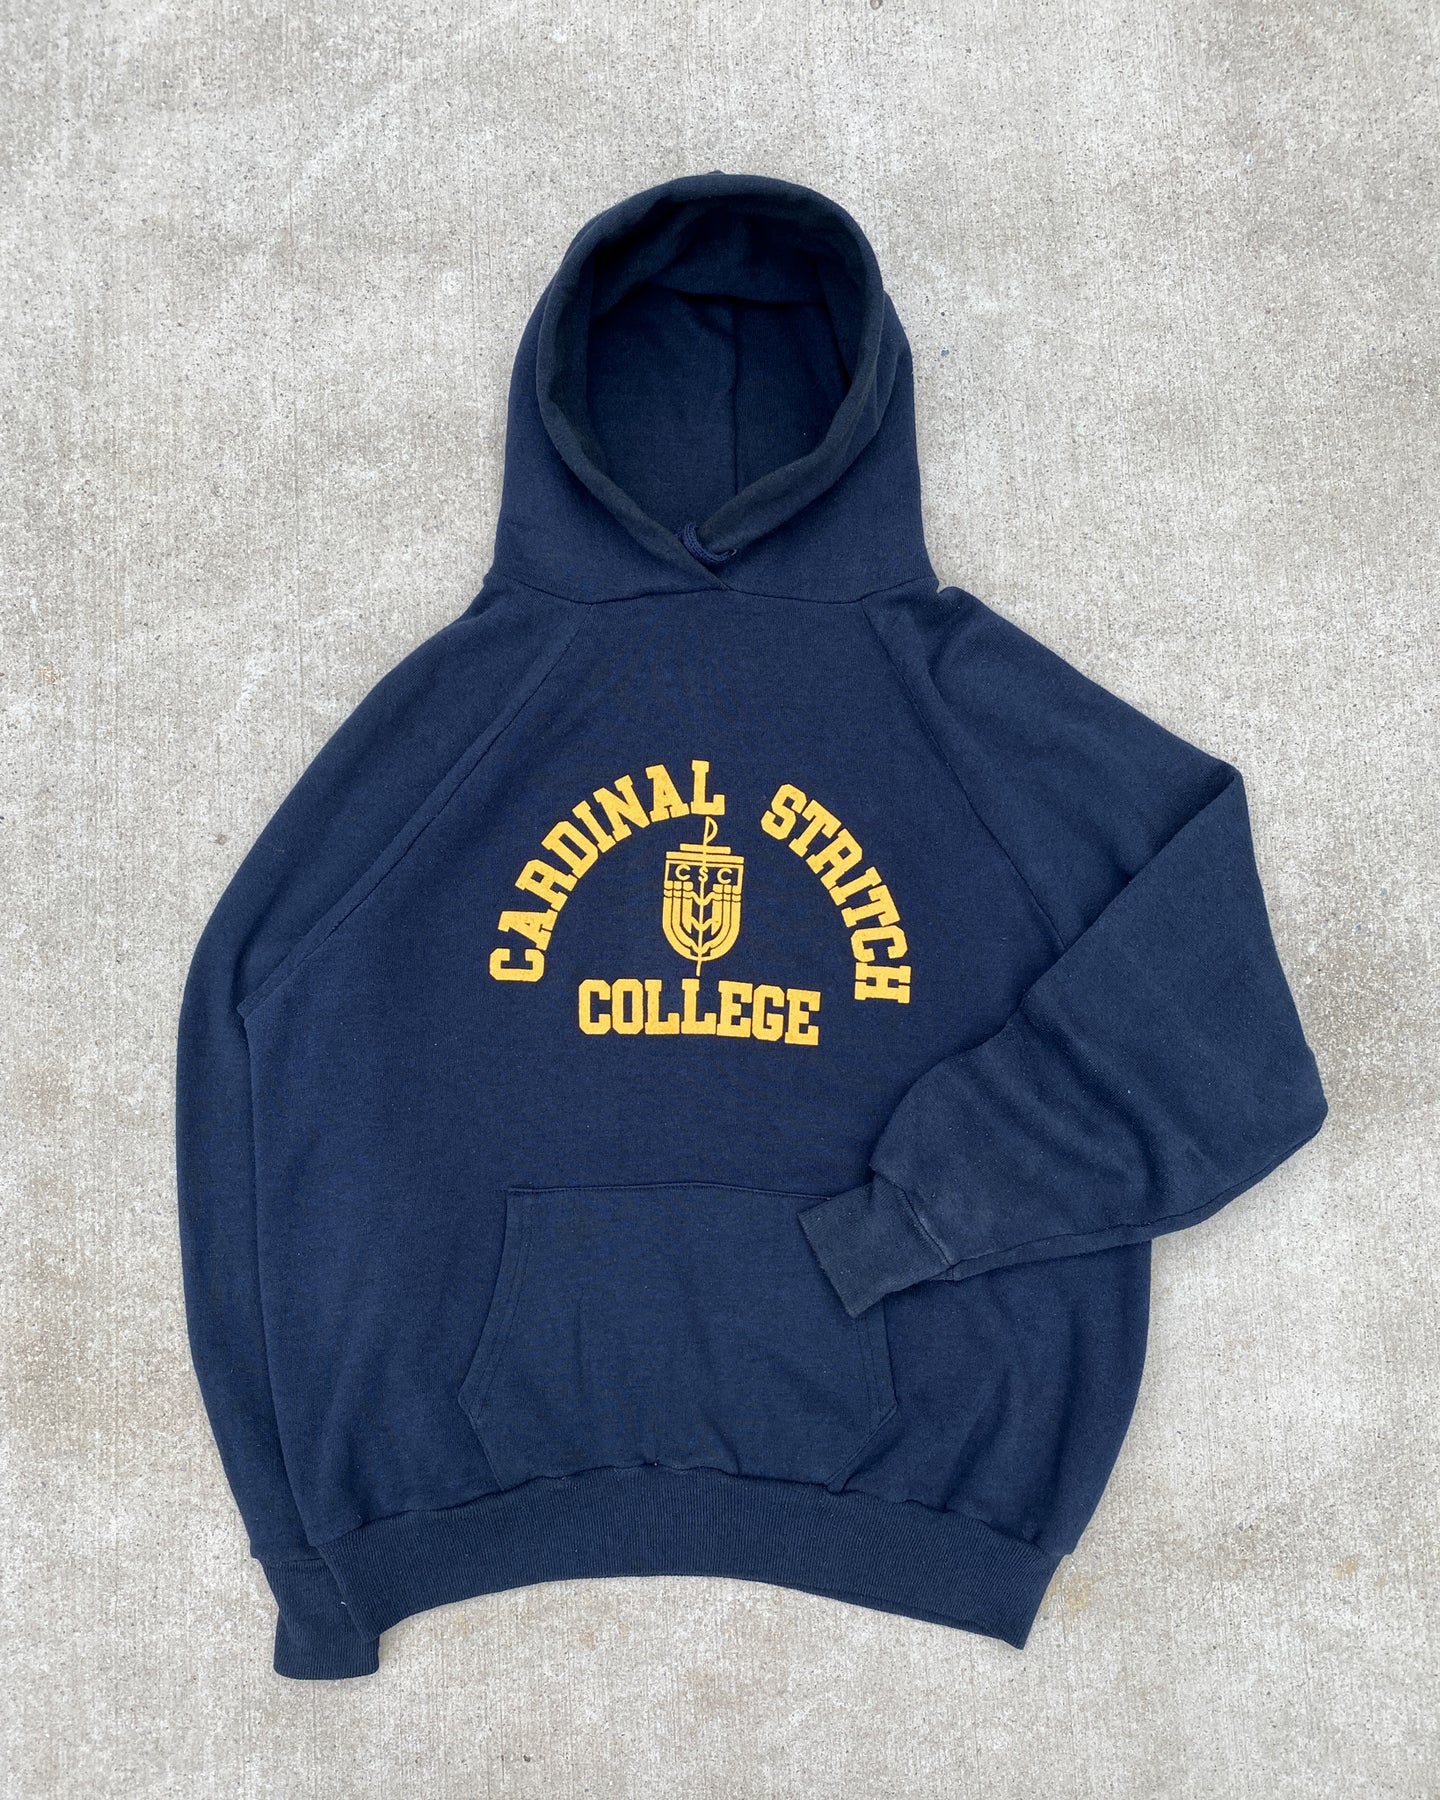 1980s Navy Cardinal Stritch College Hoodie - Size Large